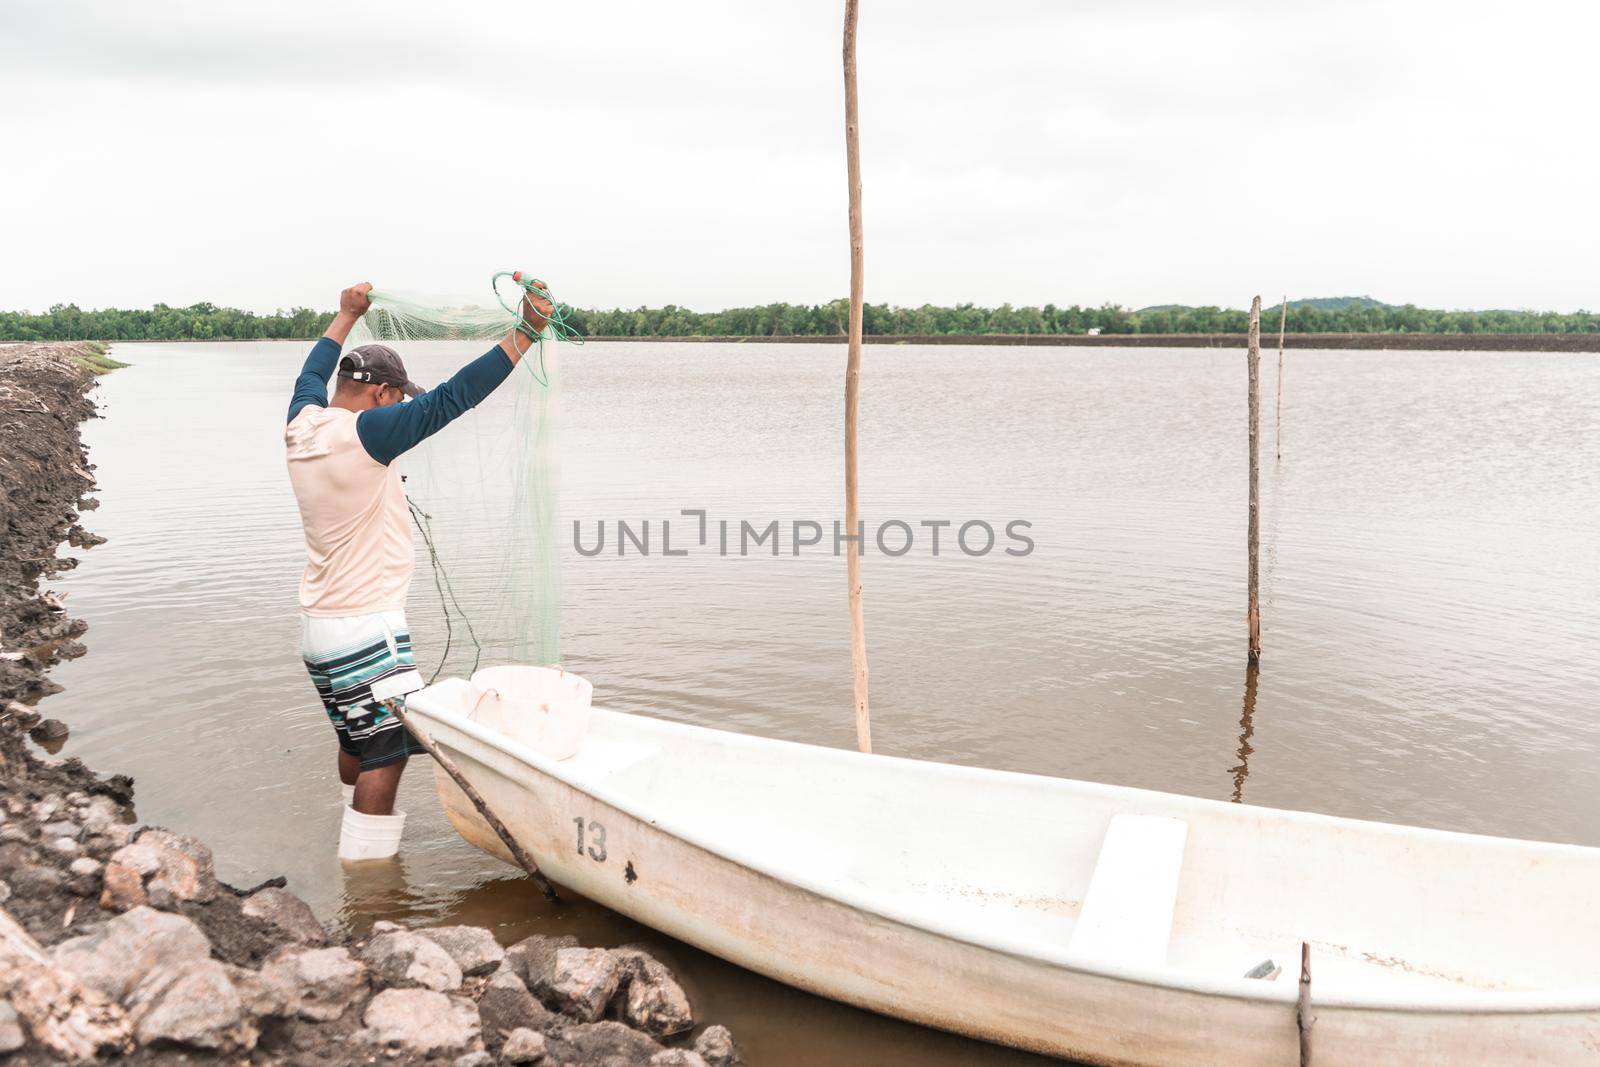 Latin American fisherman checking his net to catch farmed shrimp in his boat in a pond by cfalvarez